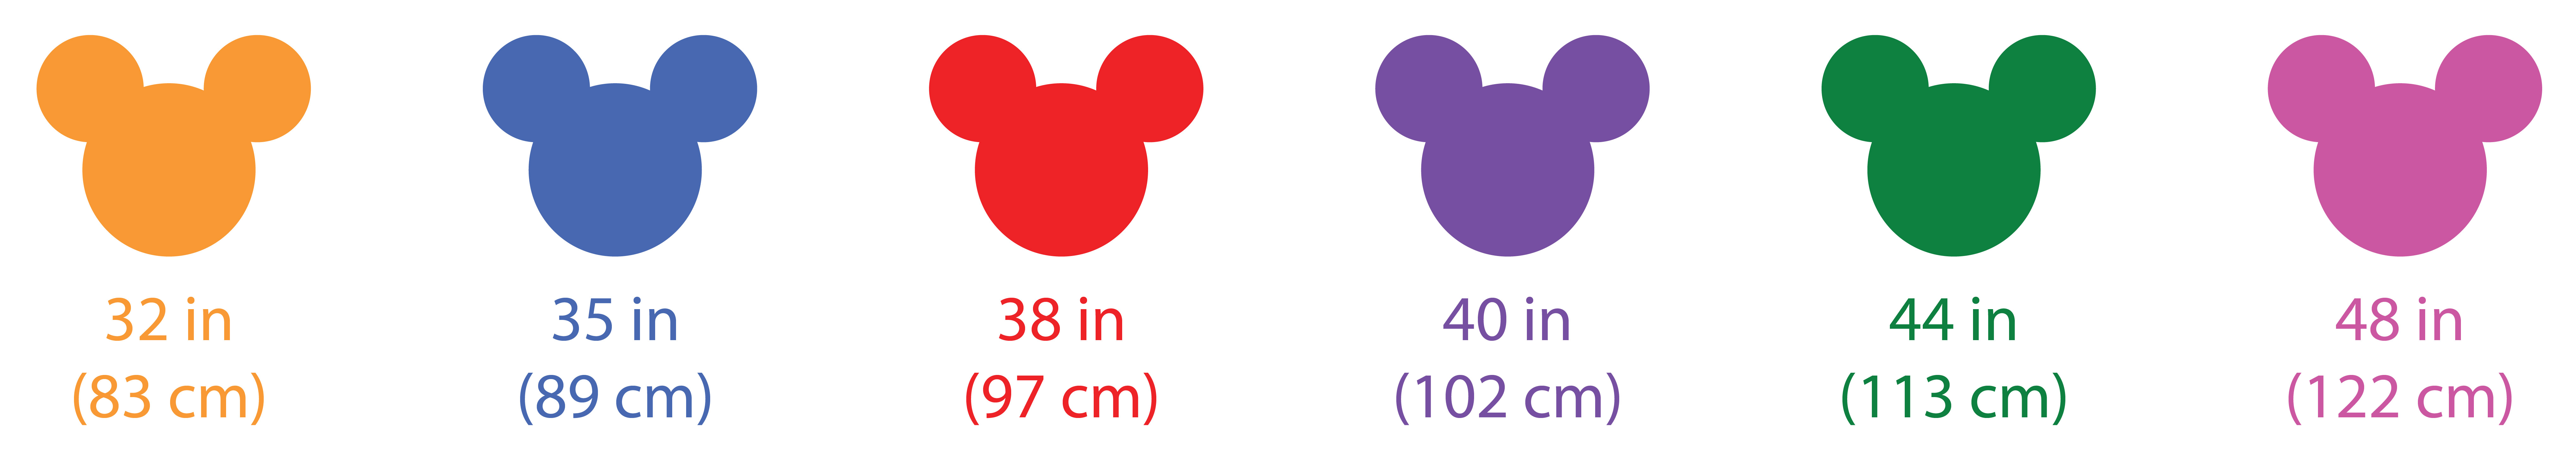 Height Requirements for Disney World Rides